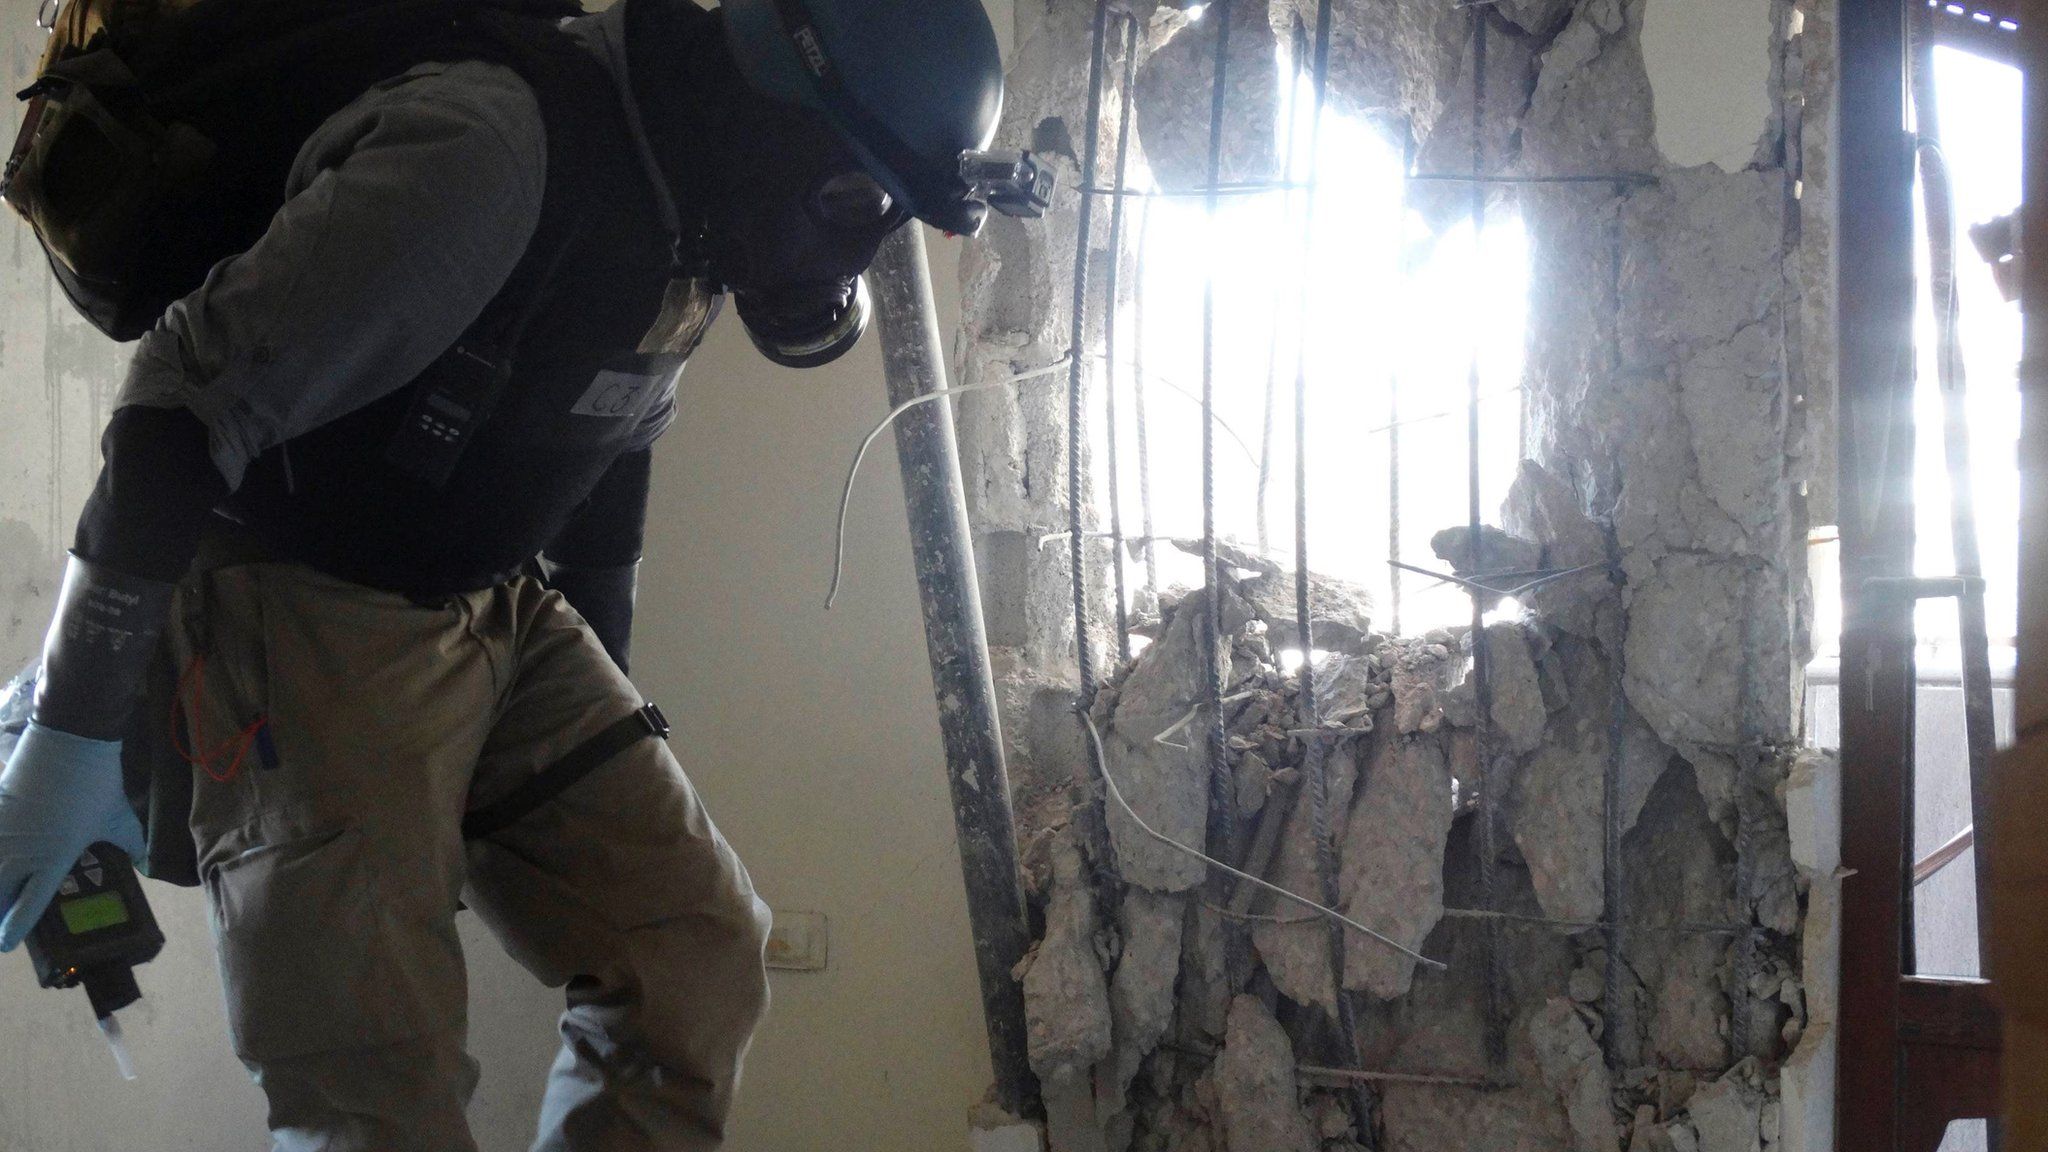 A UN chemical weapons expert inspects one of the sites of an alleged chemical weapons attack in Damascus